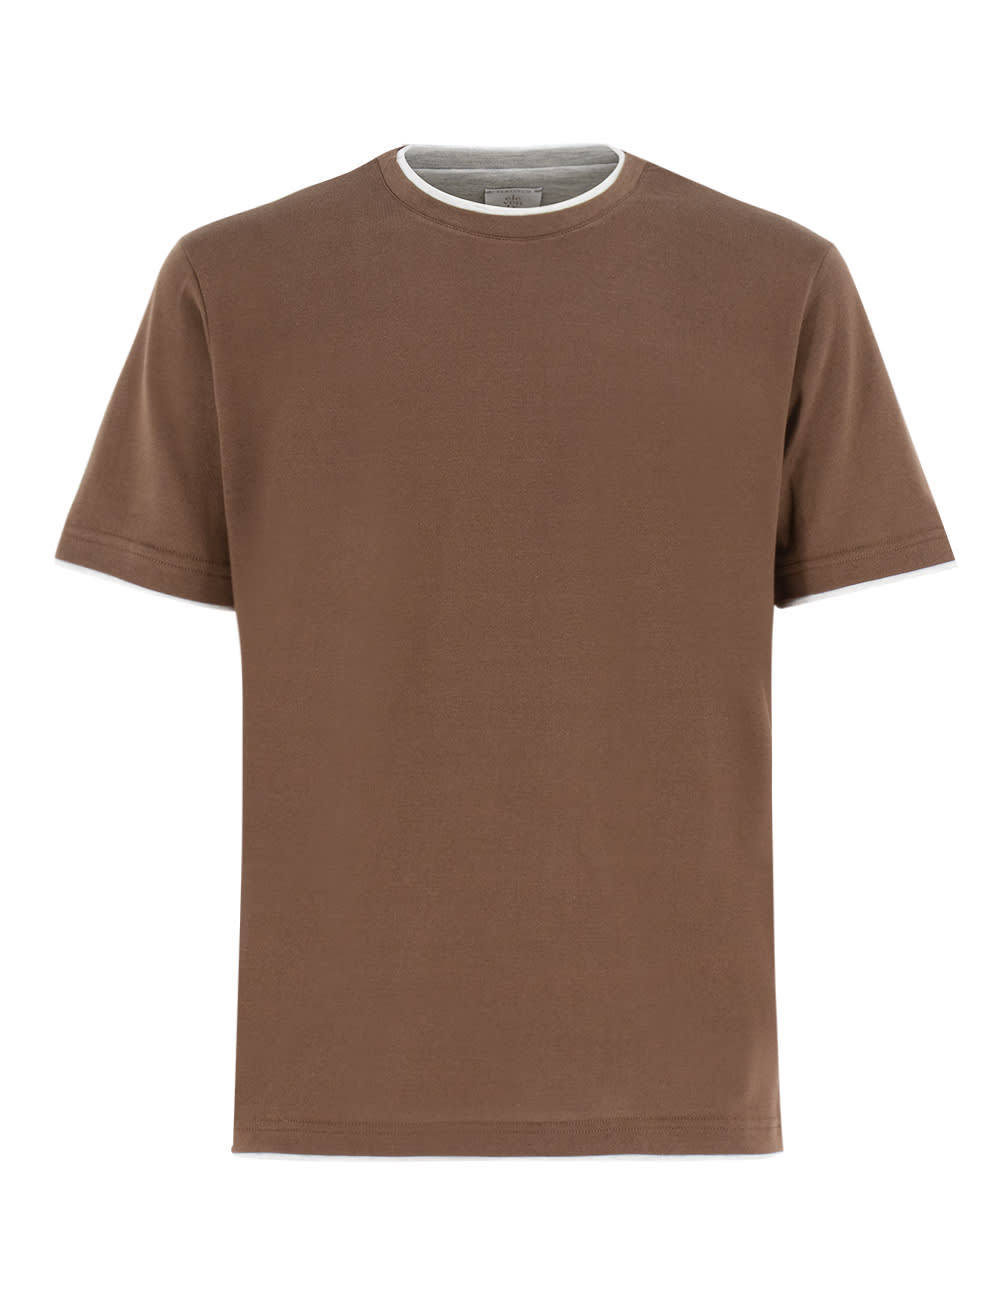 Eleventy T-shirt In Brown And Light Gray